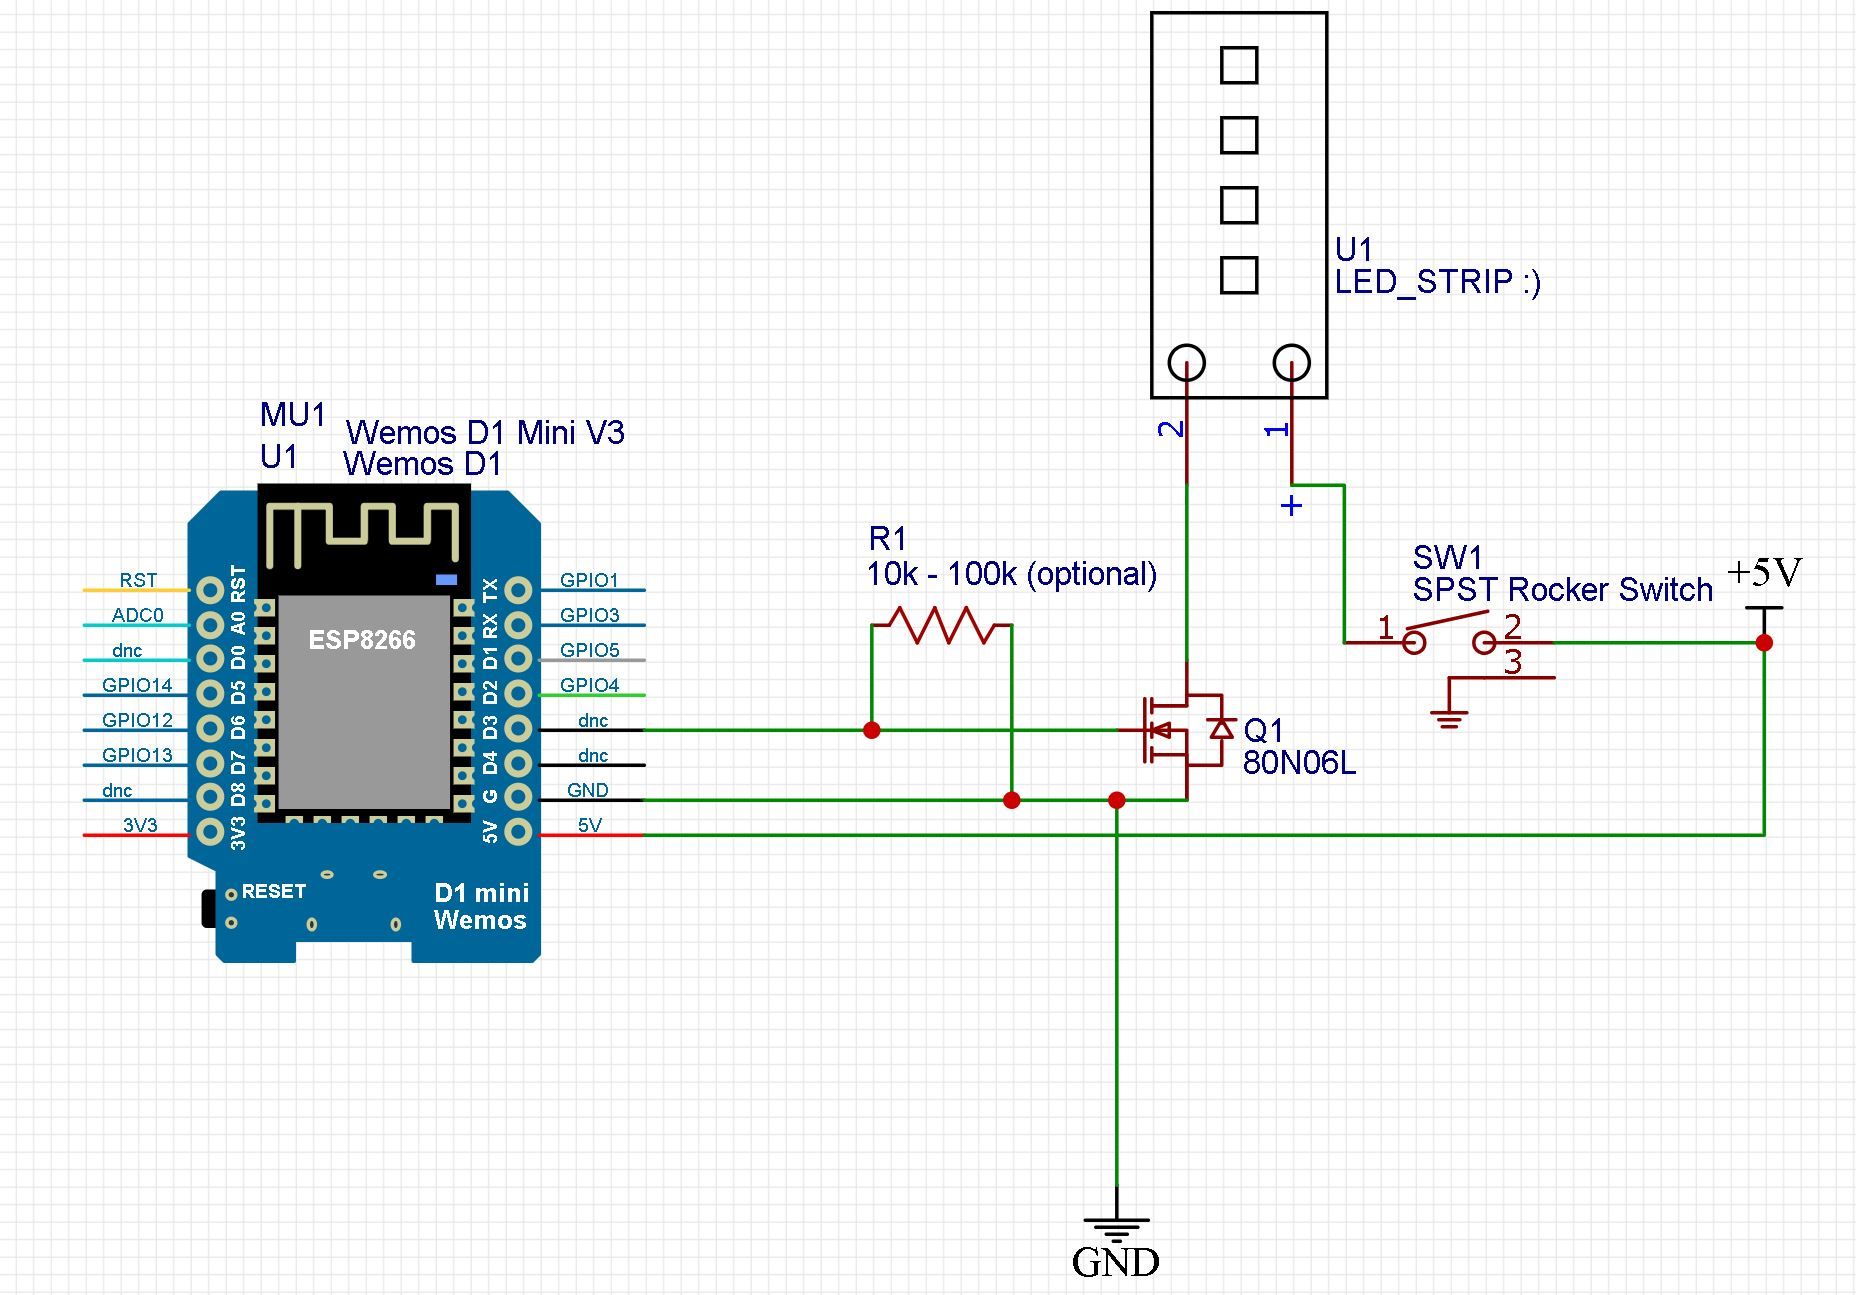 Schematic diagram using a 3-pin rocket switch (with LED indicator like the one shown above).